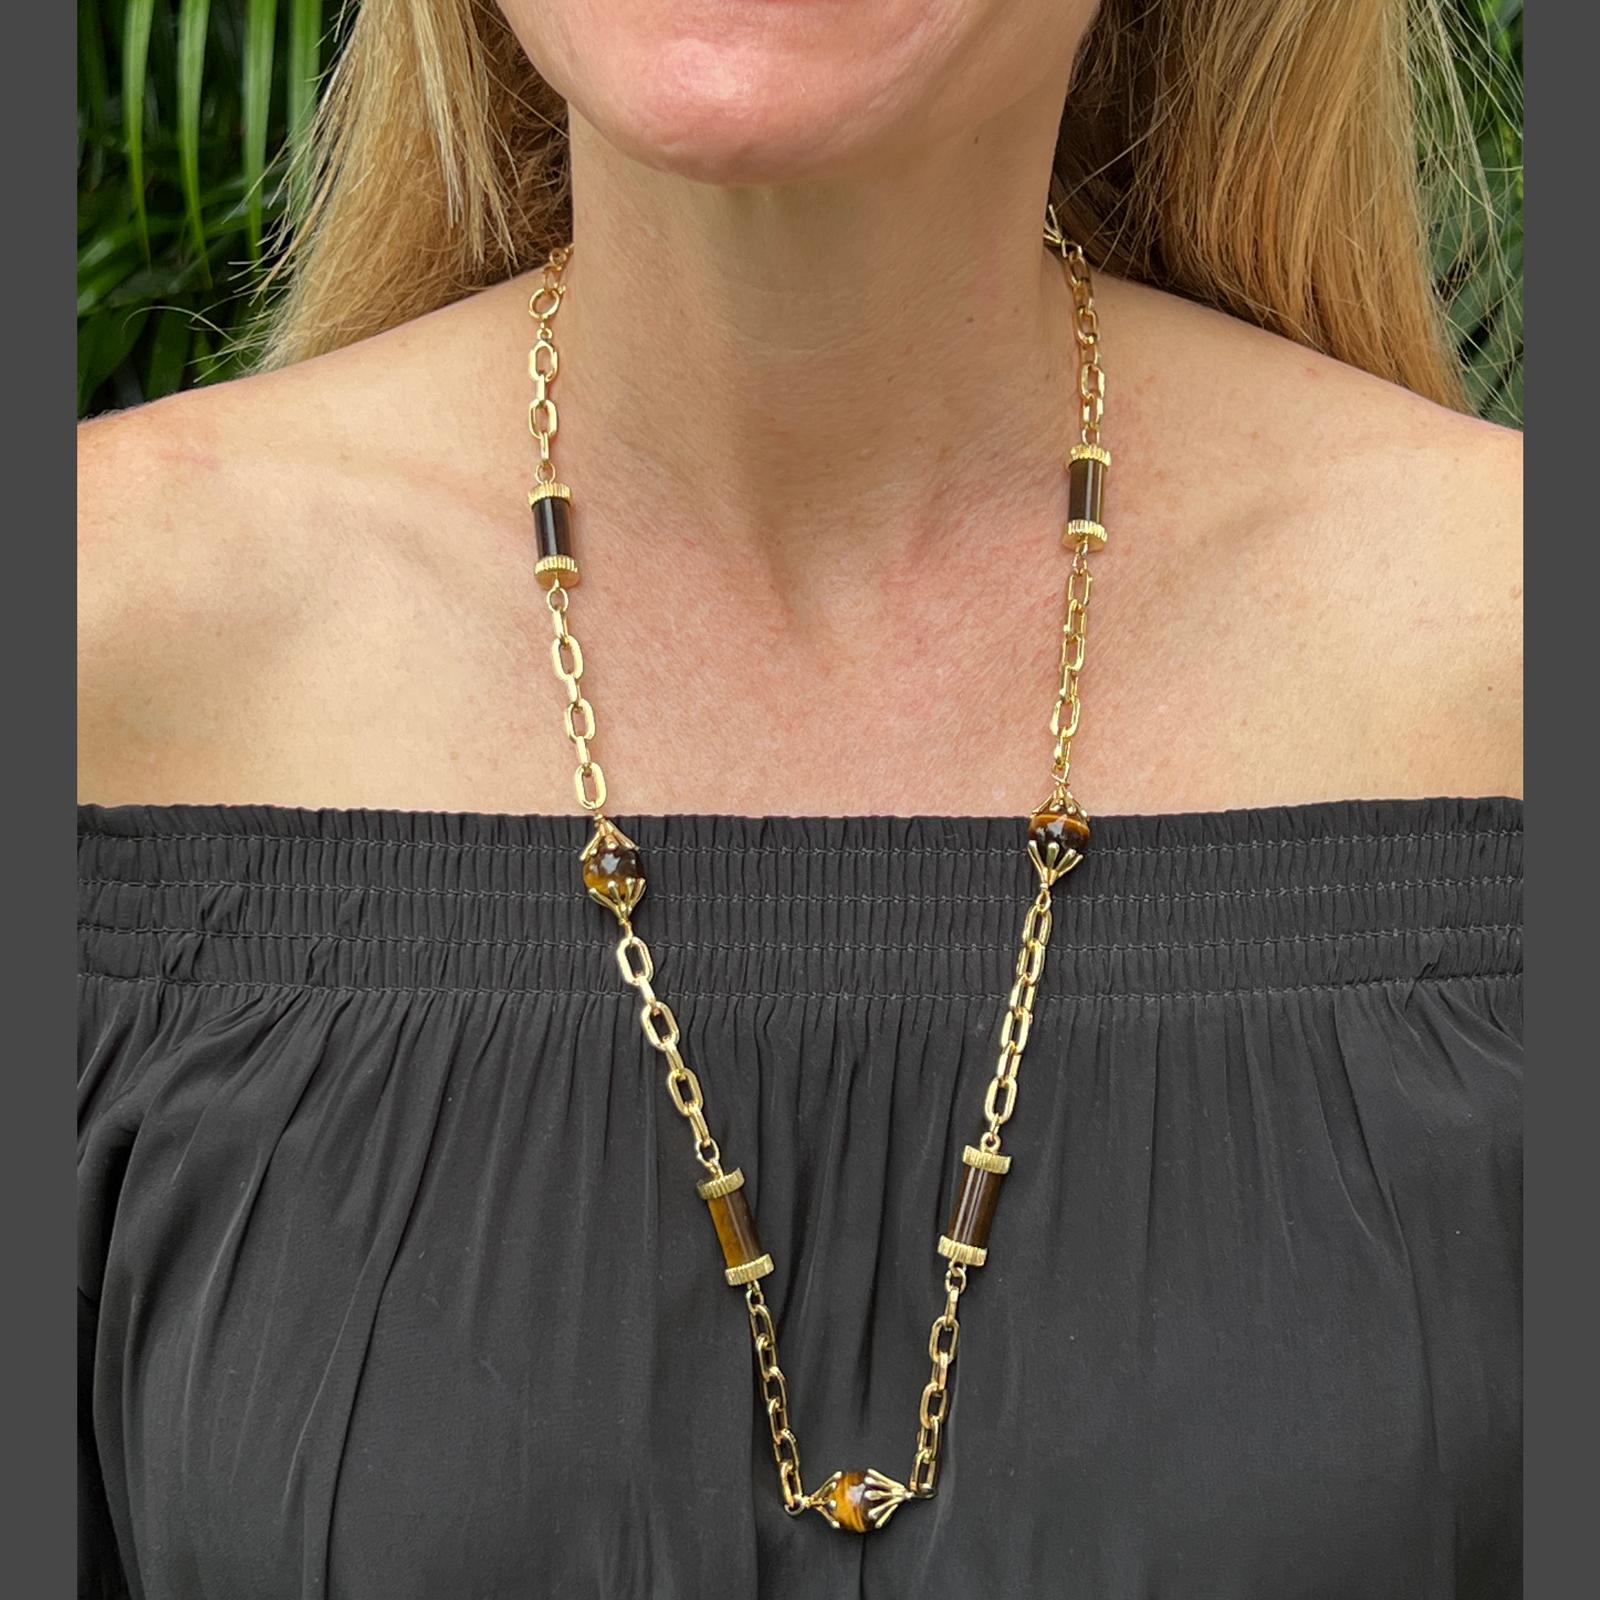 Long link necklace featuring tiger's eye gemstones and 18 karat yellow gold. The 27 inch necklace features 4 round tiger's eye stations and 5 tubular tiger's eye stations. 